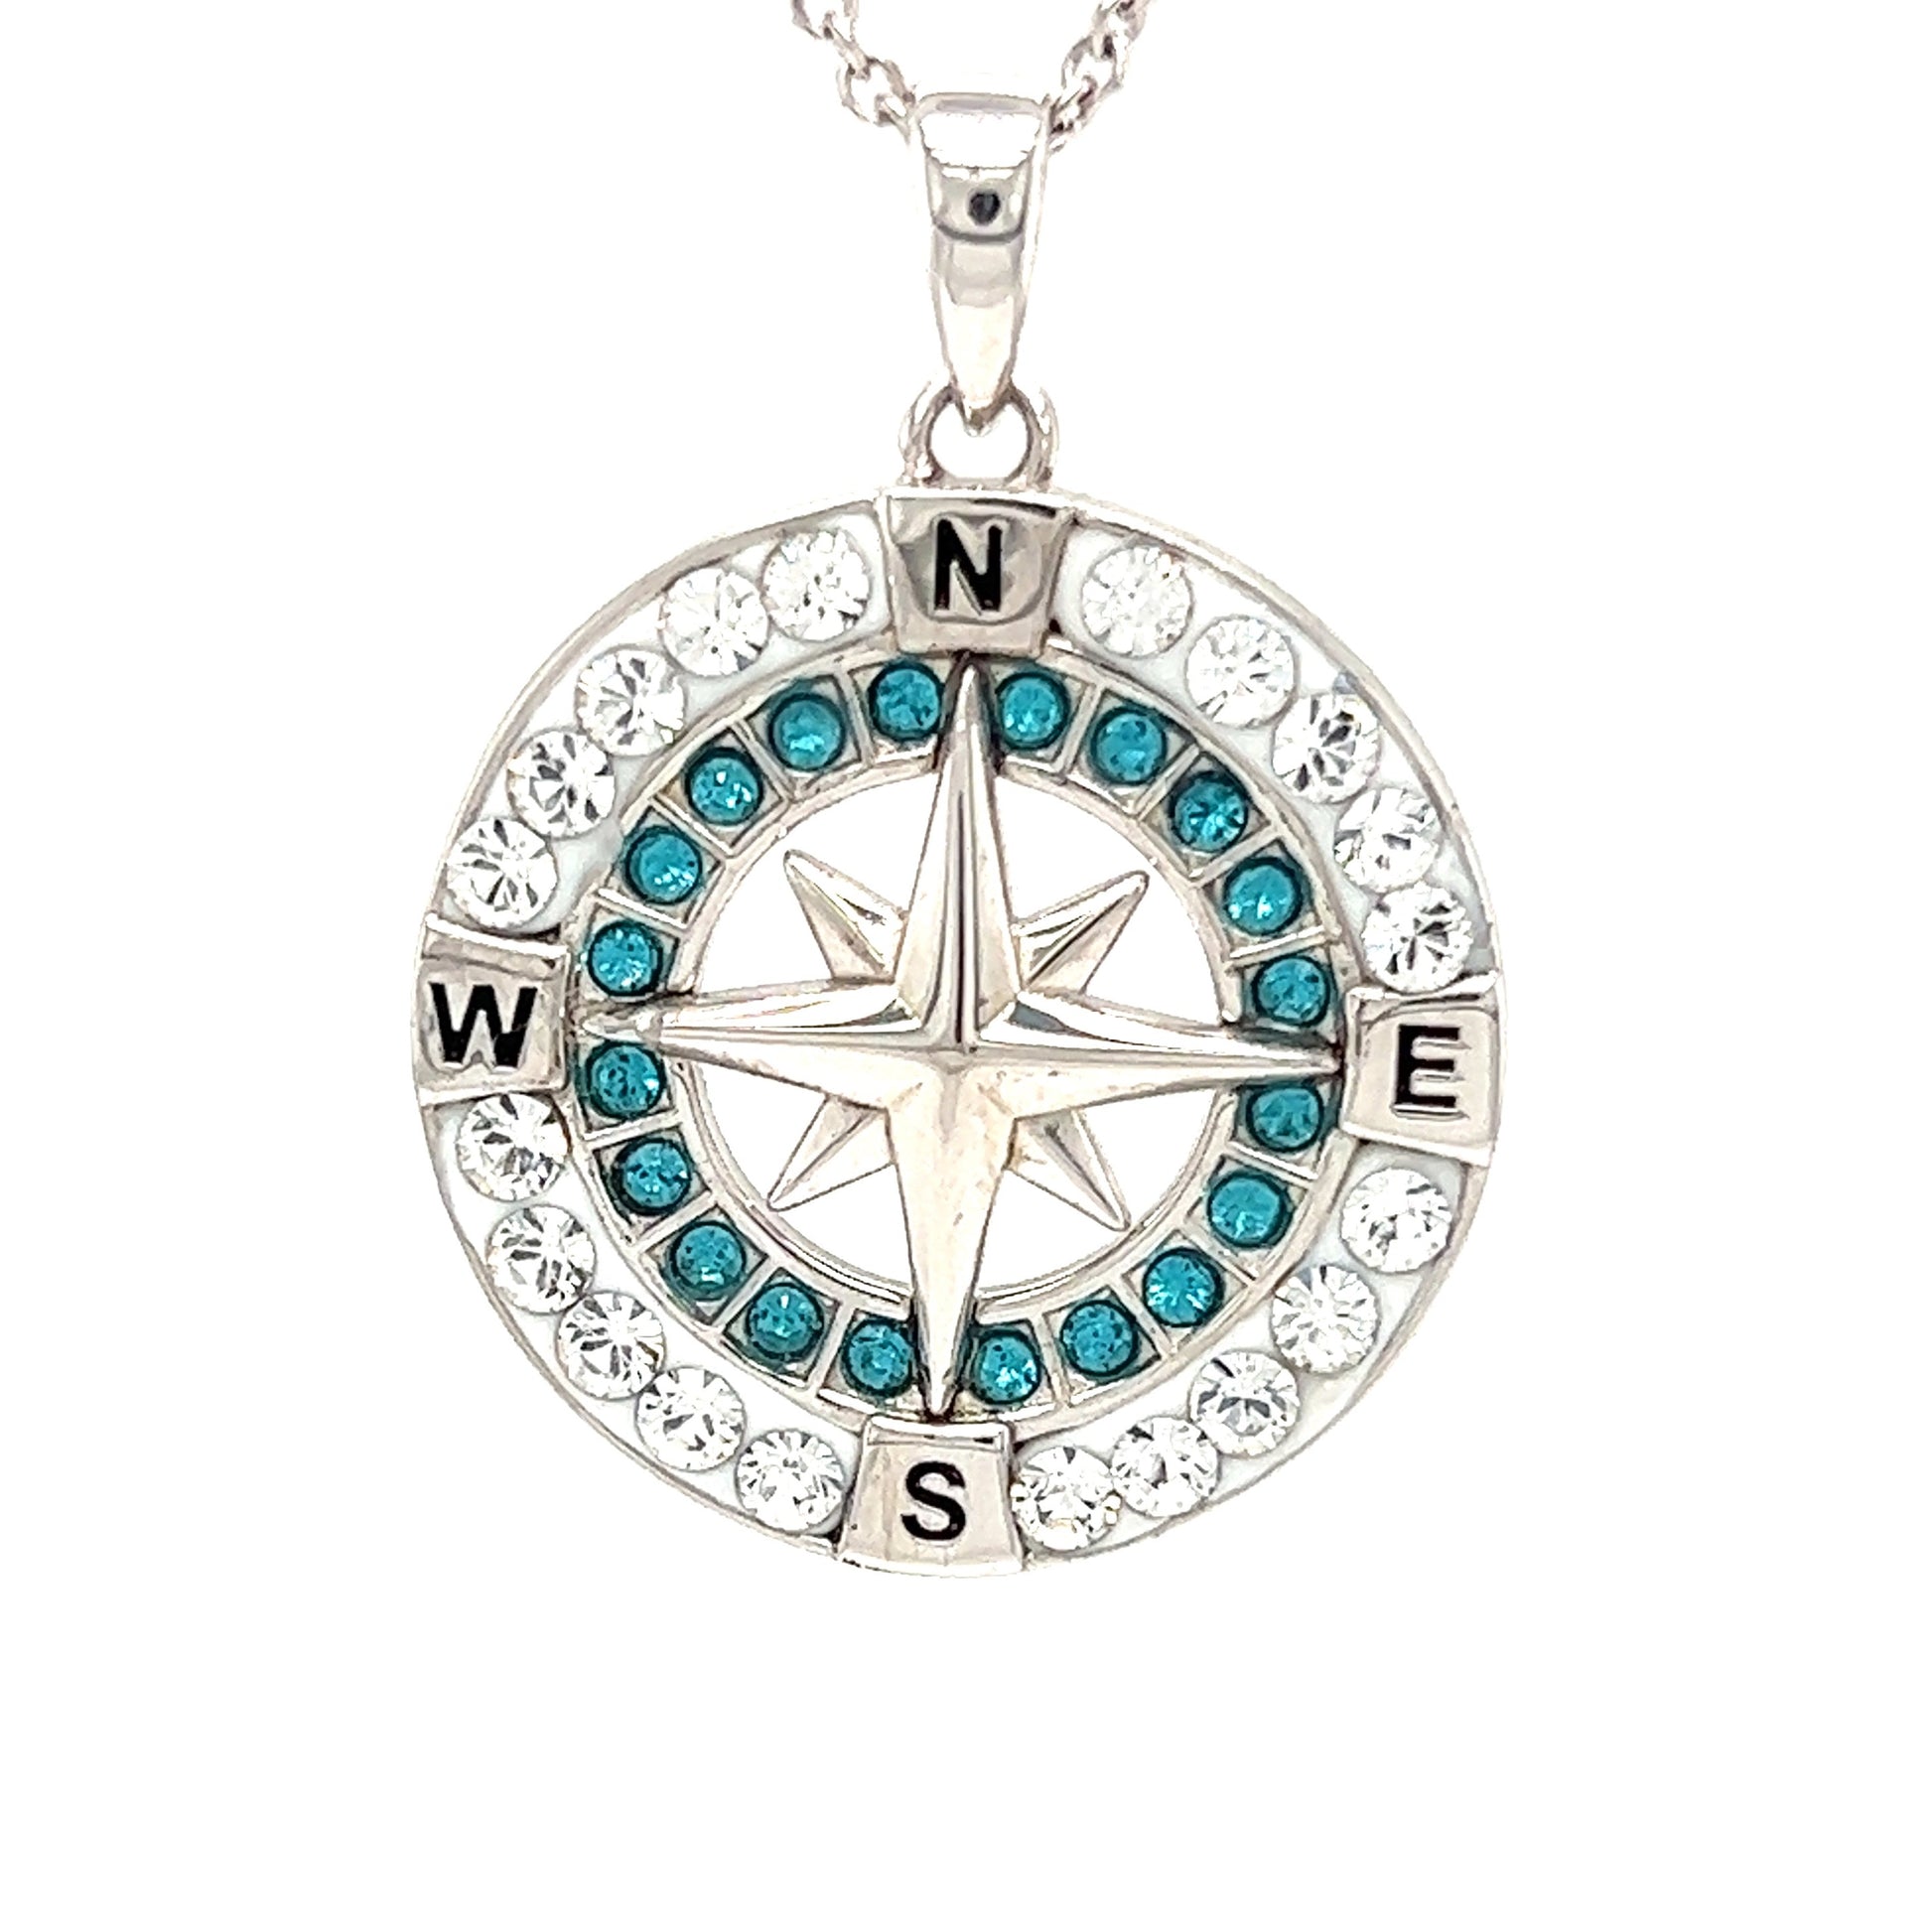 Compass Necklace with Aqua and White Crystals in Sterling Silver Front Pendant View